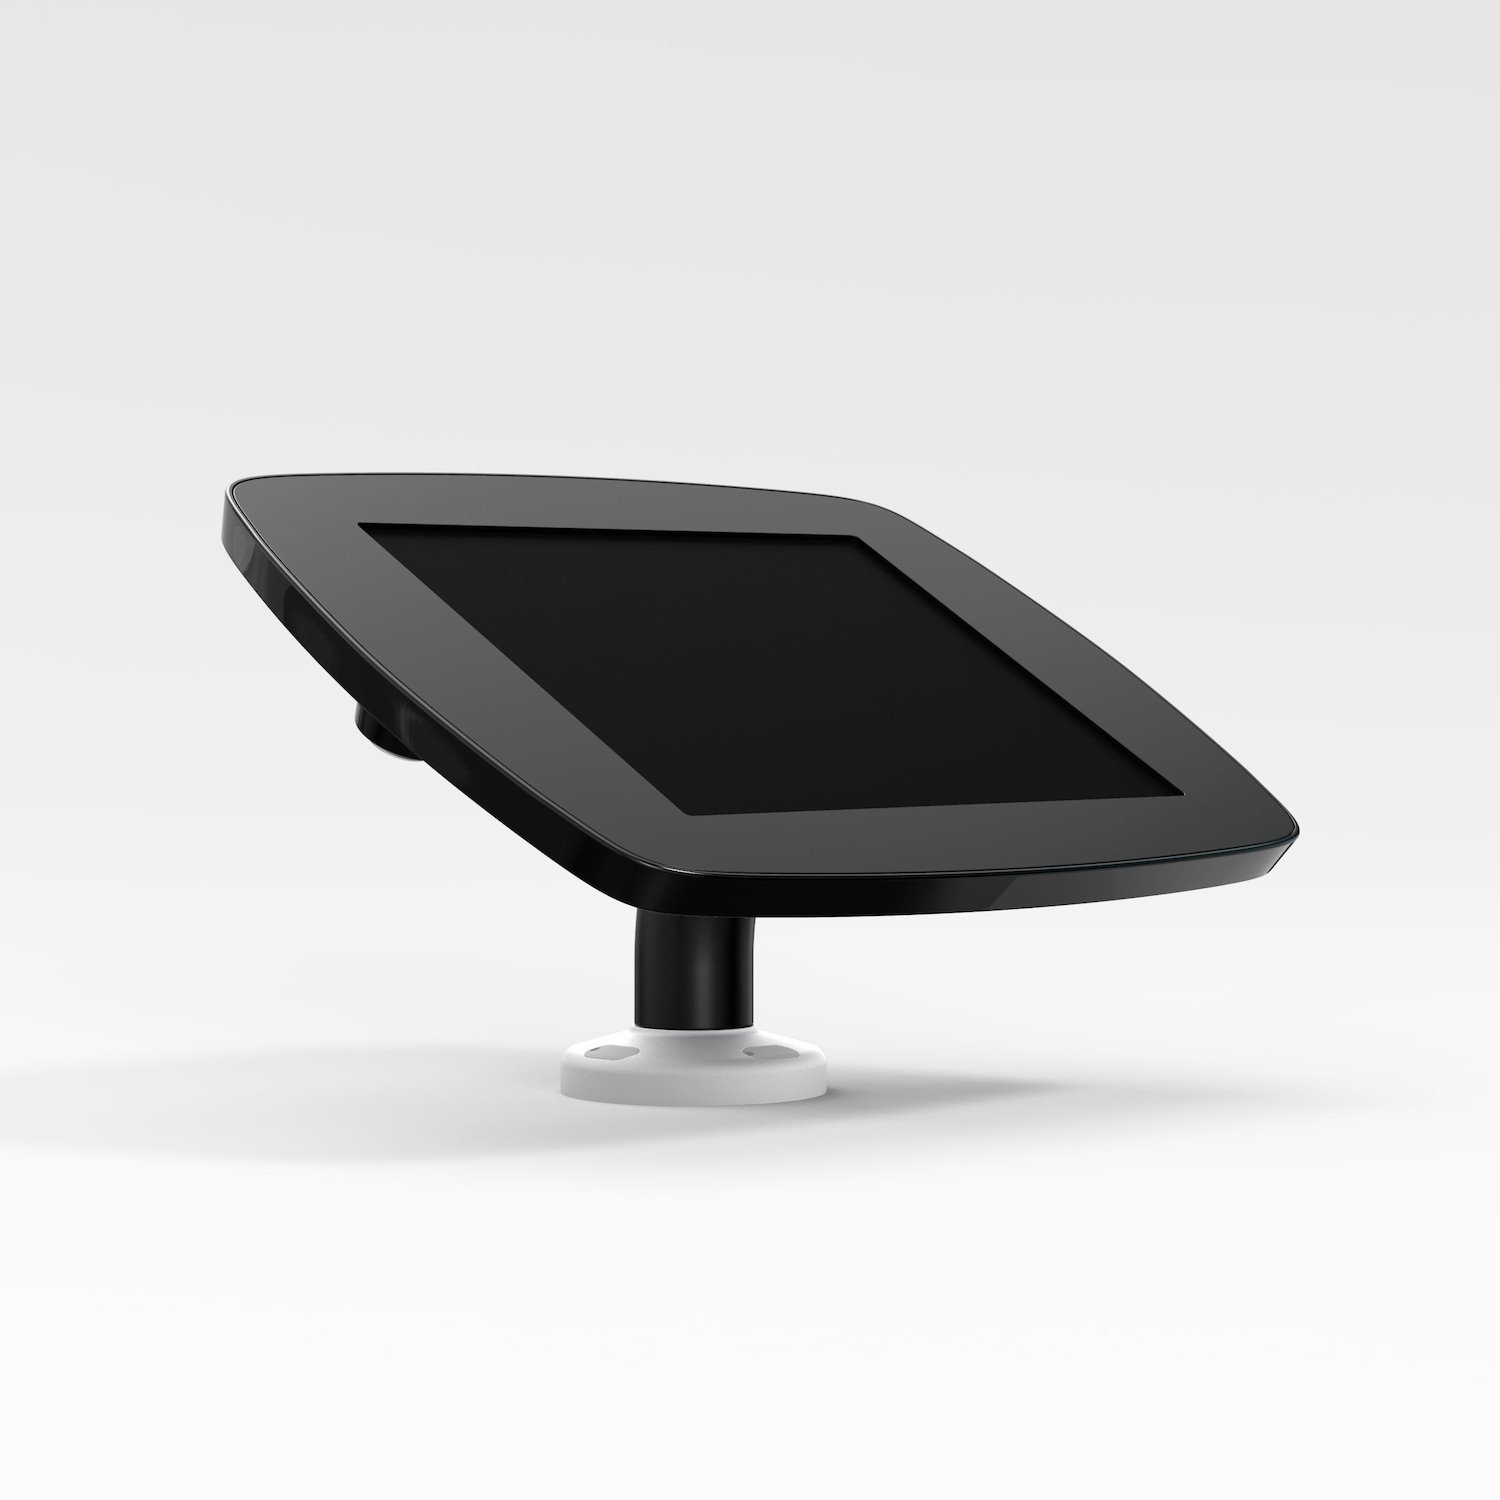 Bouncepad Swivel Desk | Samsung Galaxy Tab S2 9.7 [2015] | Black | Covered Front Camera And Home Button | (Swivdeskblkclosedcam/Closedhome TS2)